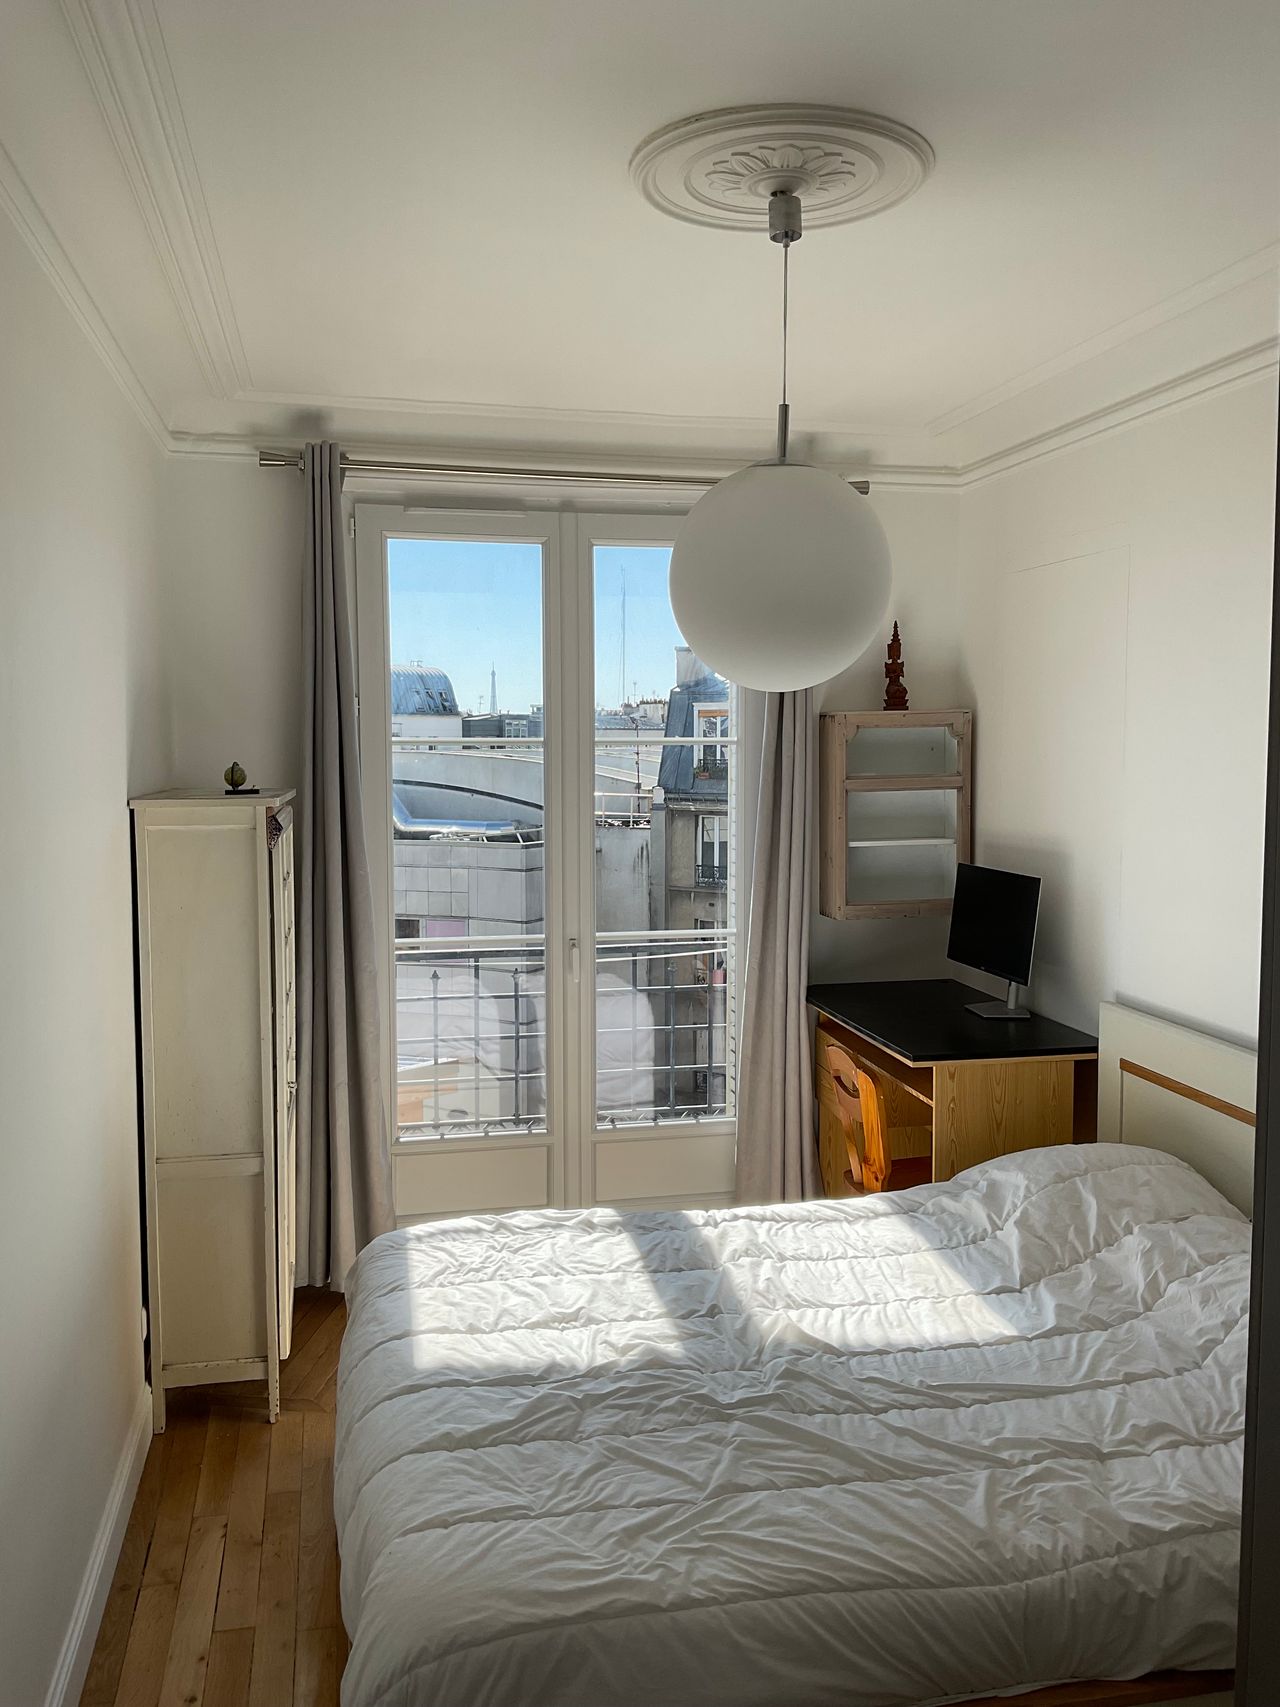 Great one bedroom flat with great view of Paris roofs